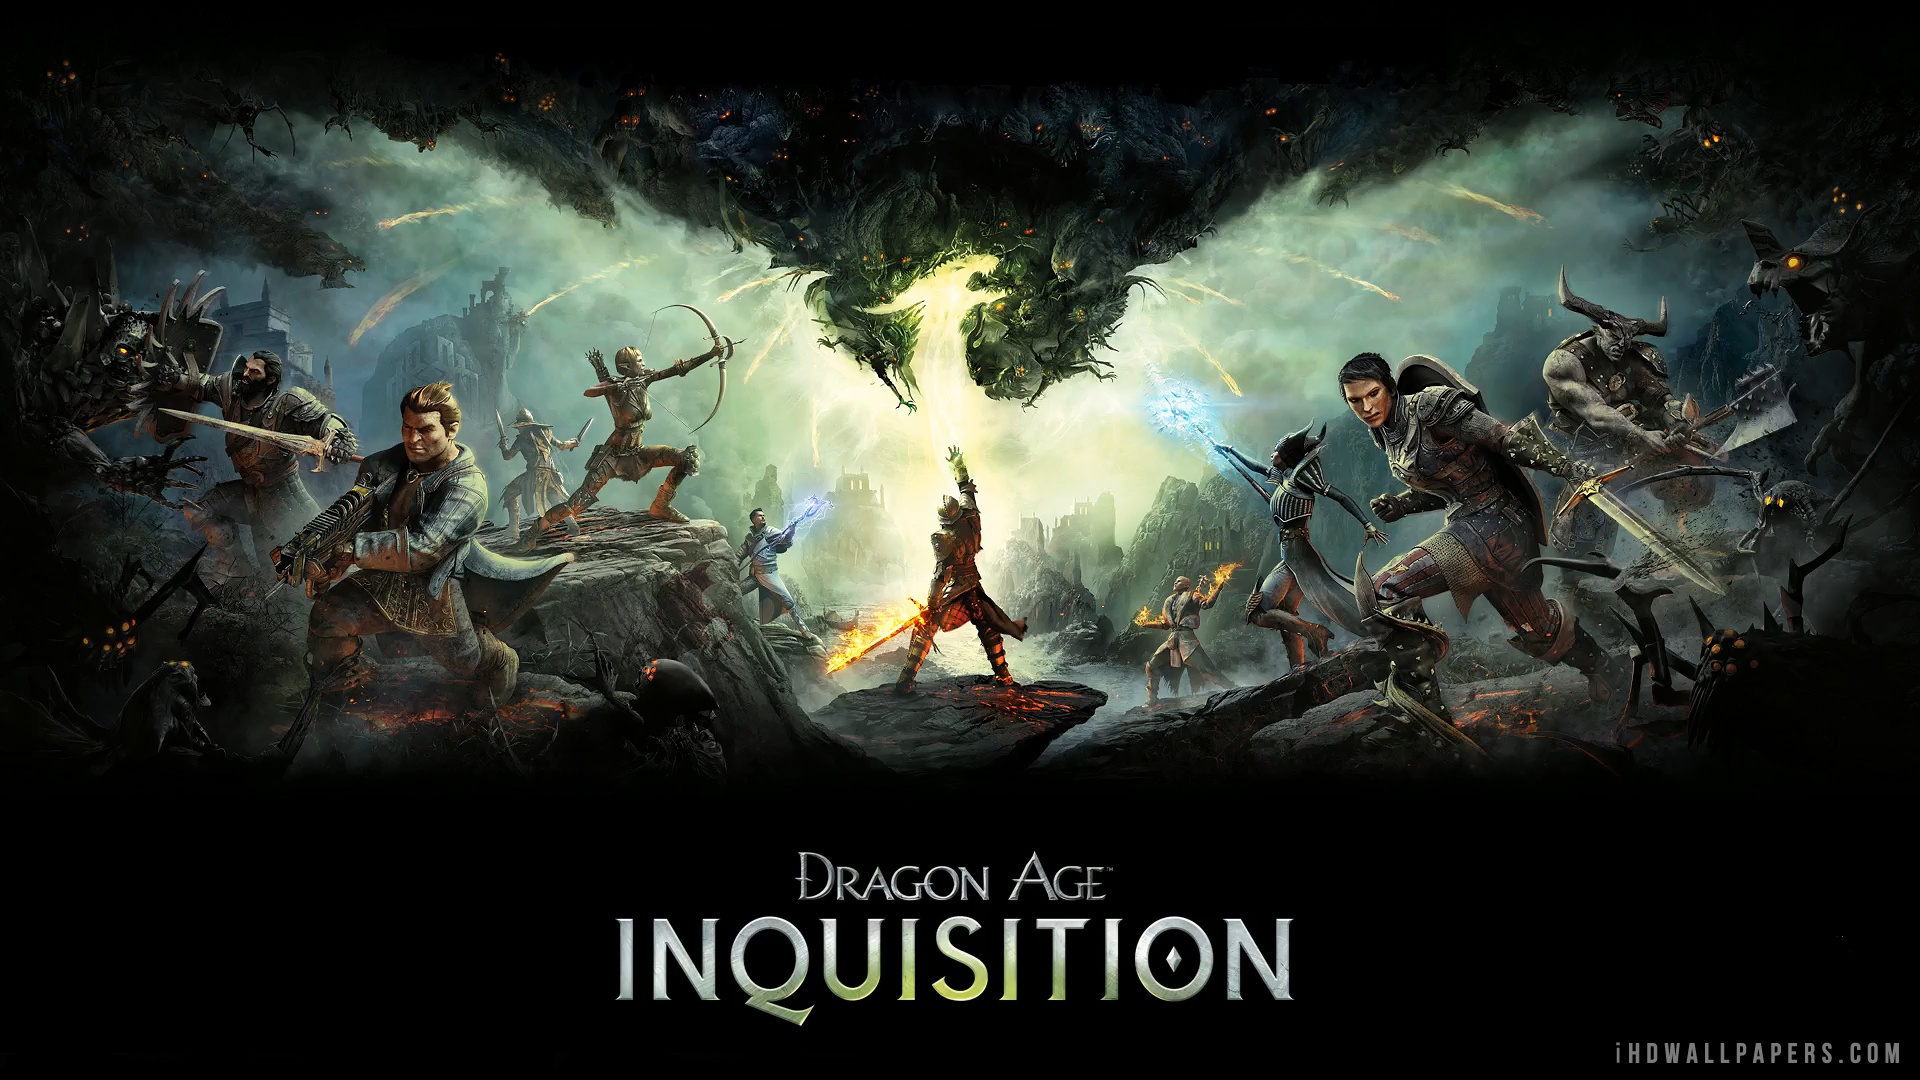 Dragon Age Inquisition HD Wallpaper   iHD Wallpapers